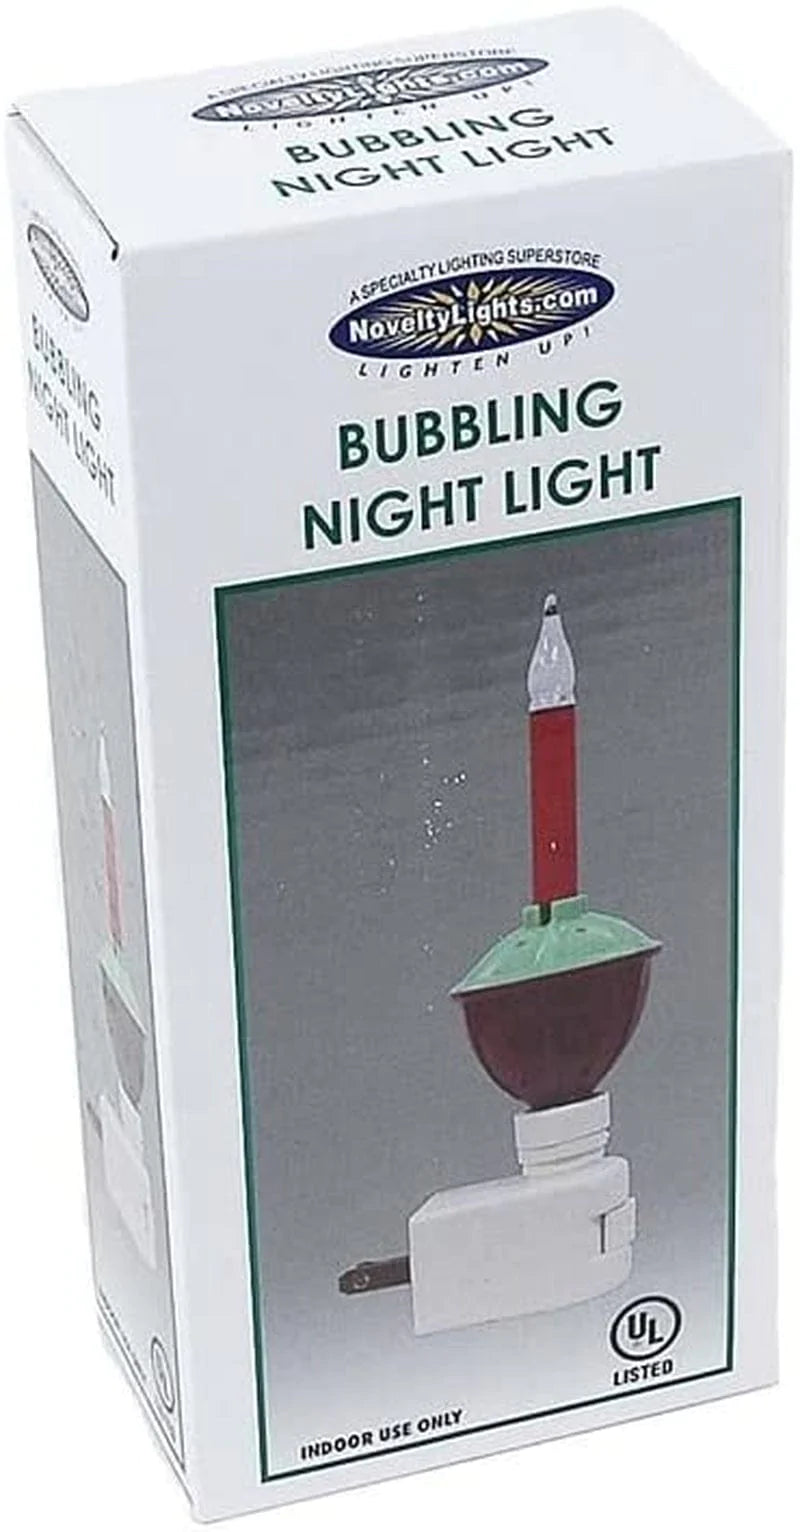 Novelty Lights Traditional Bubble Night Light, 1 Red Bubble Night Light, (120 V Outlet, 1 Pack)